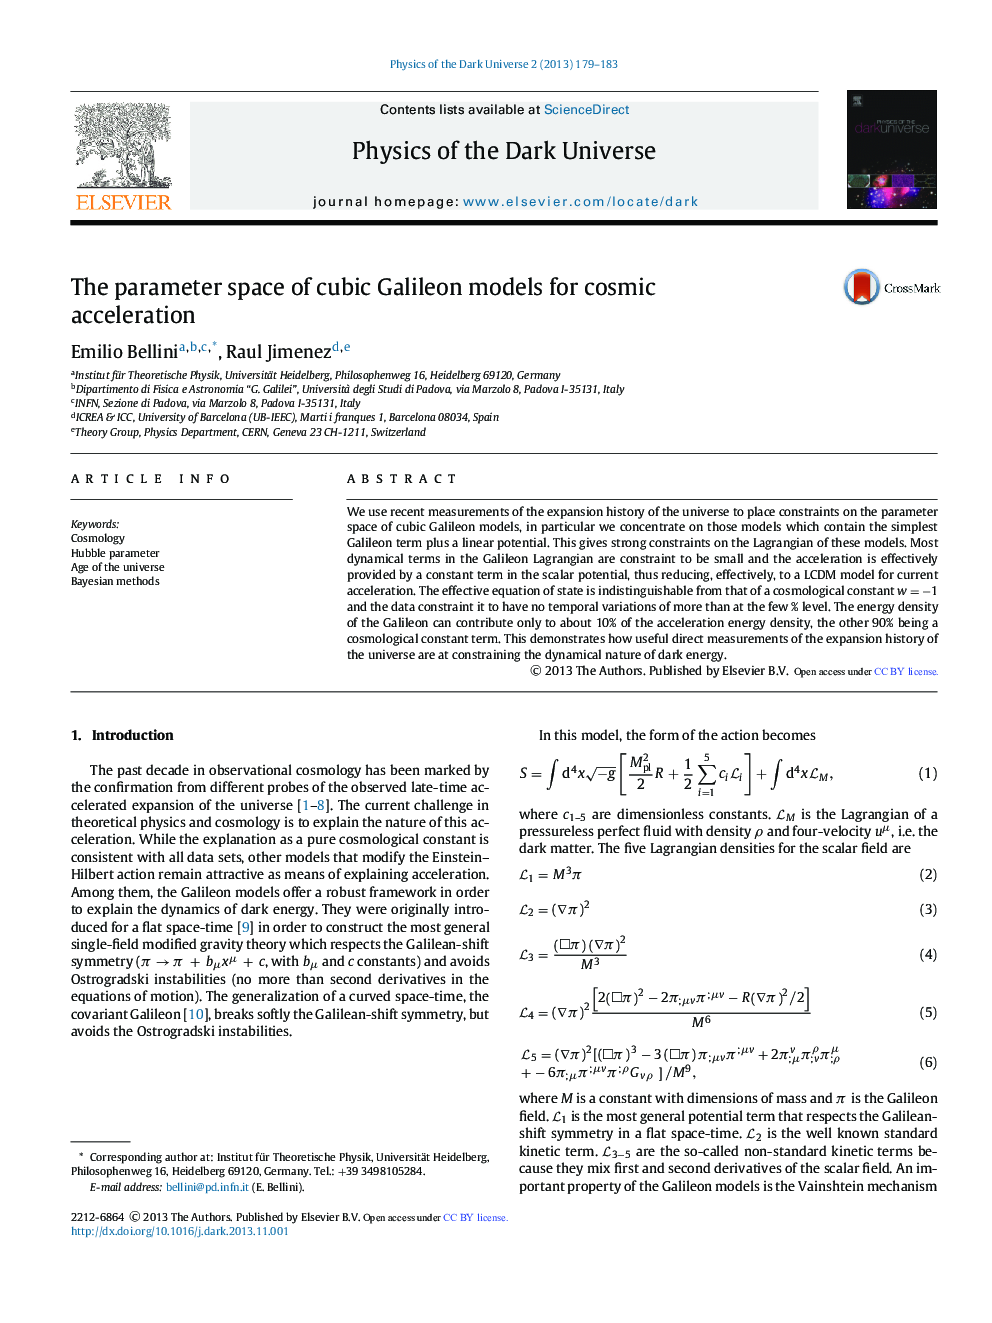 The parameter space of cubic Galileon models for cosmic acceleration